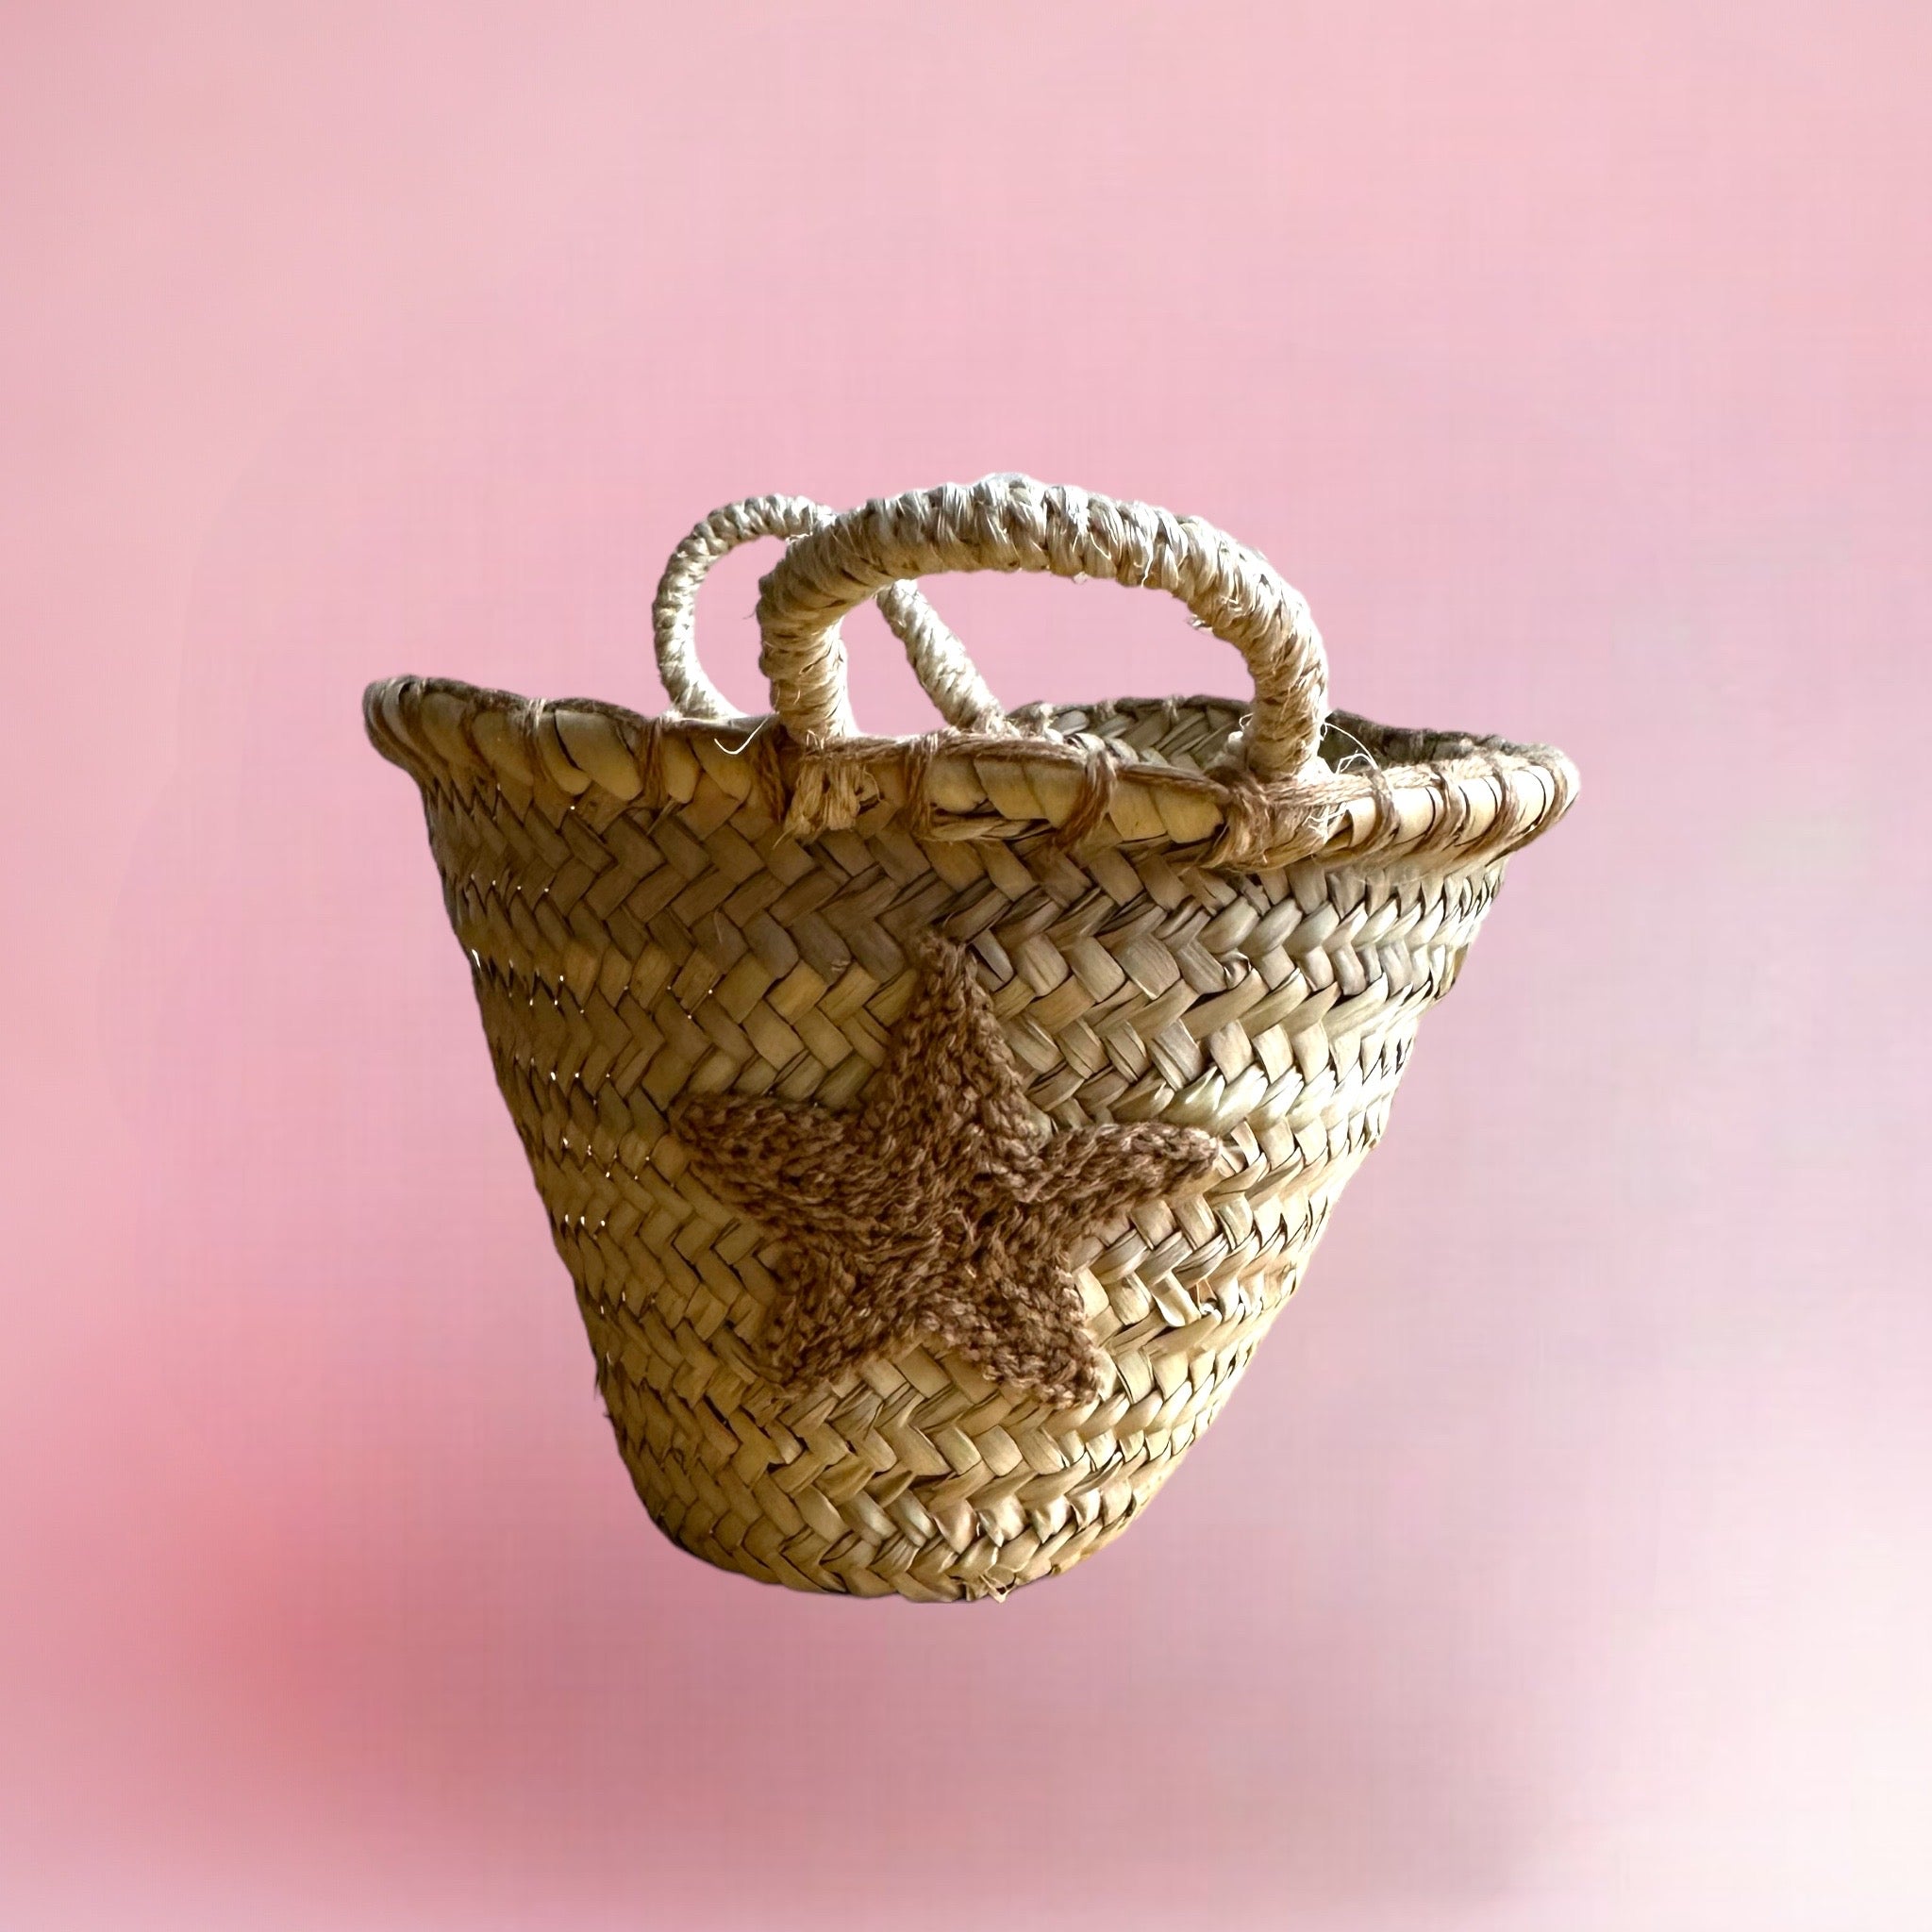 NEW: Small basket bag made of palm leaf with embroidery